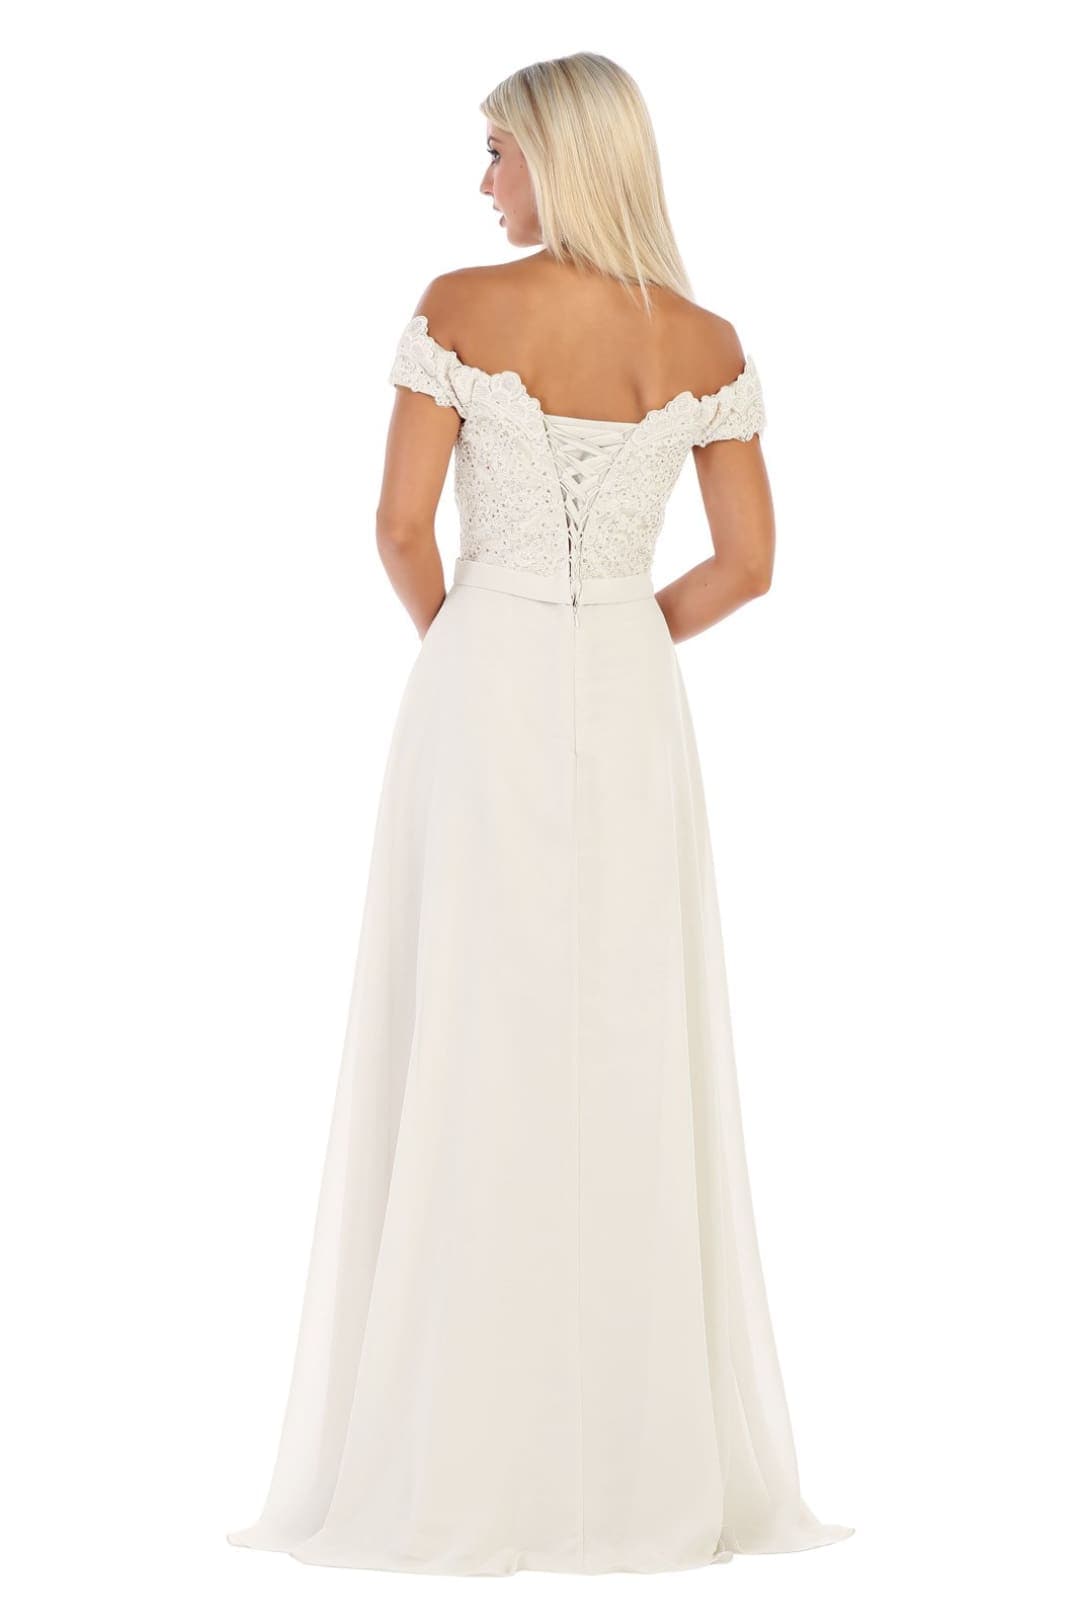 Long Wedding Ivory Gown